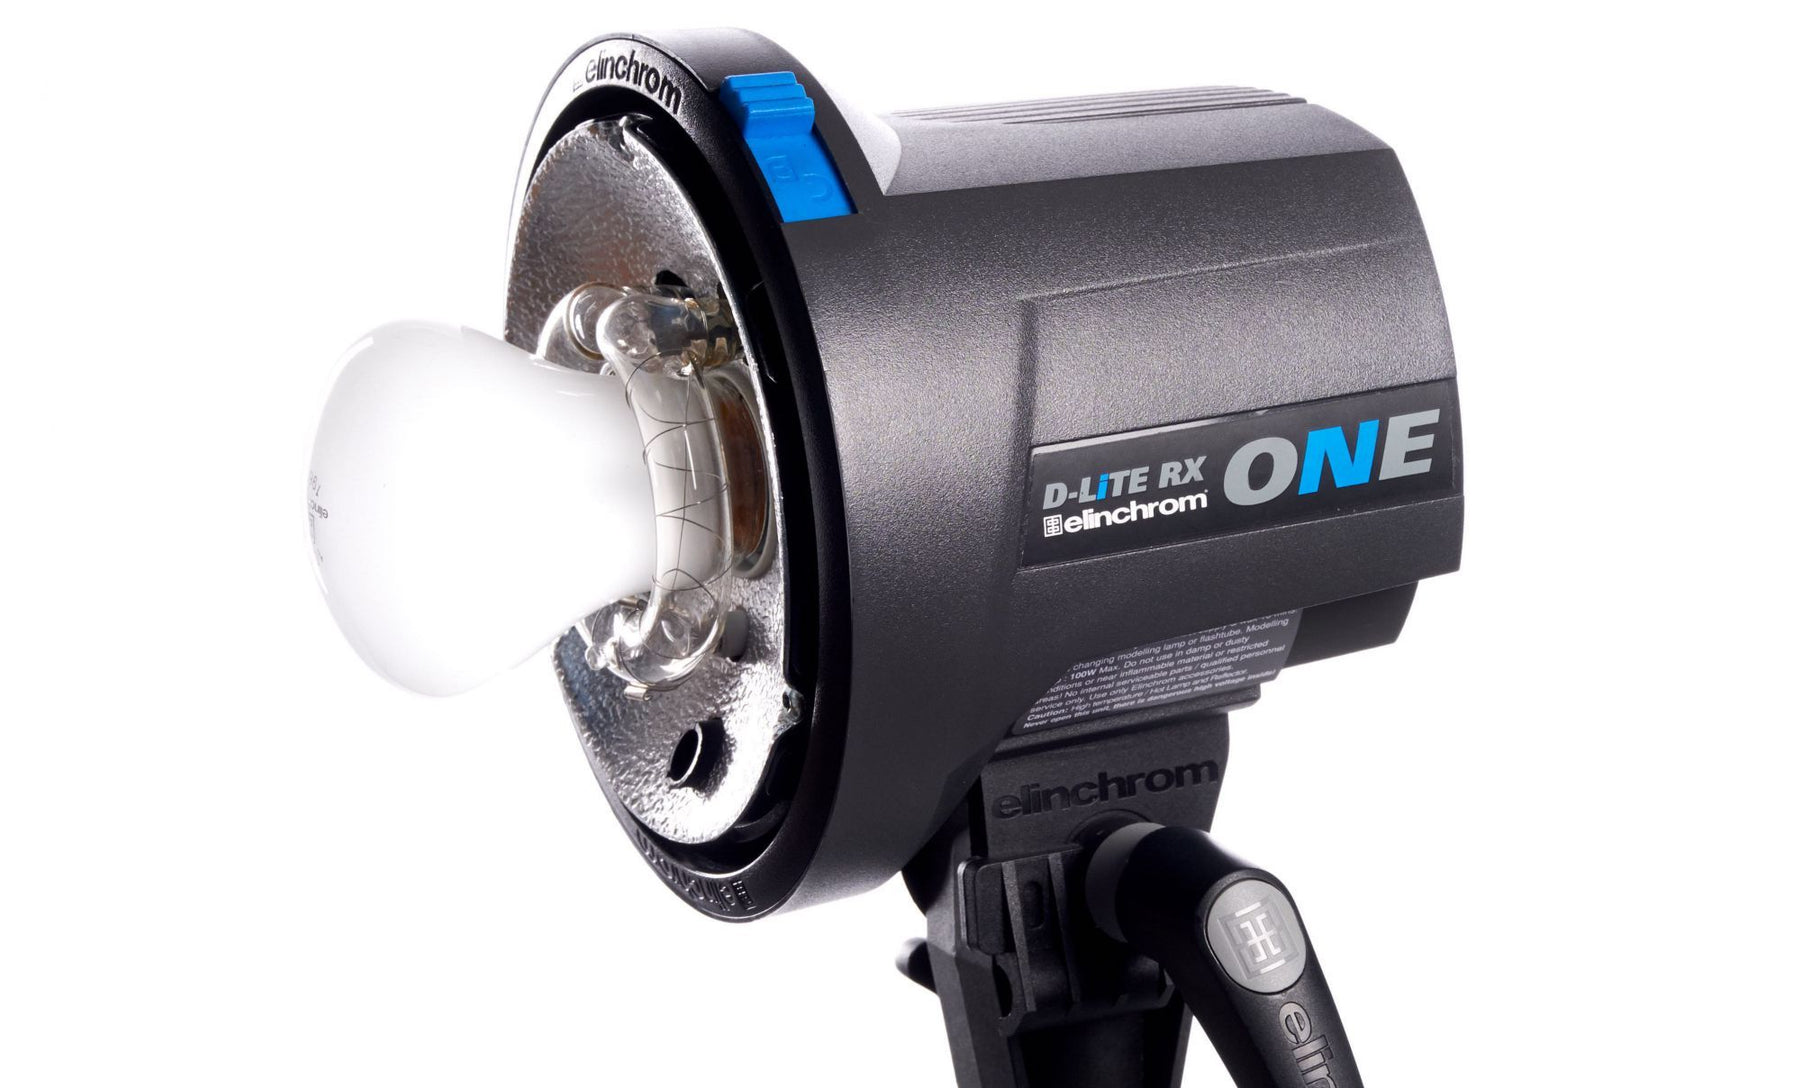 Elinchrom D-Lite RX One Review by Steve Aves